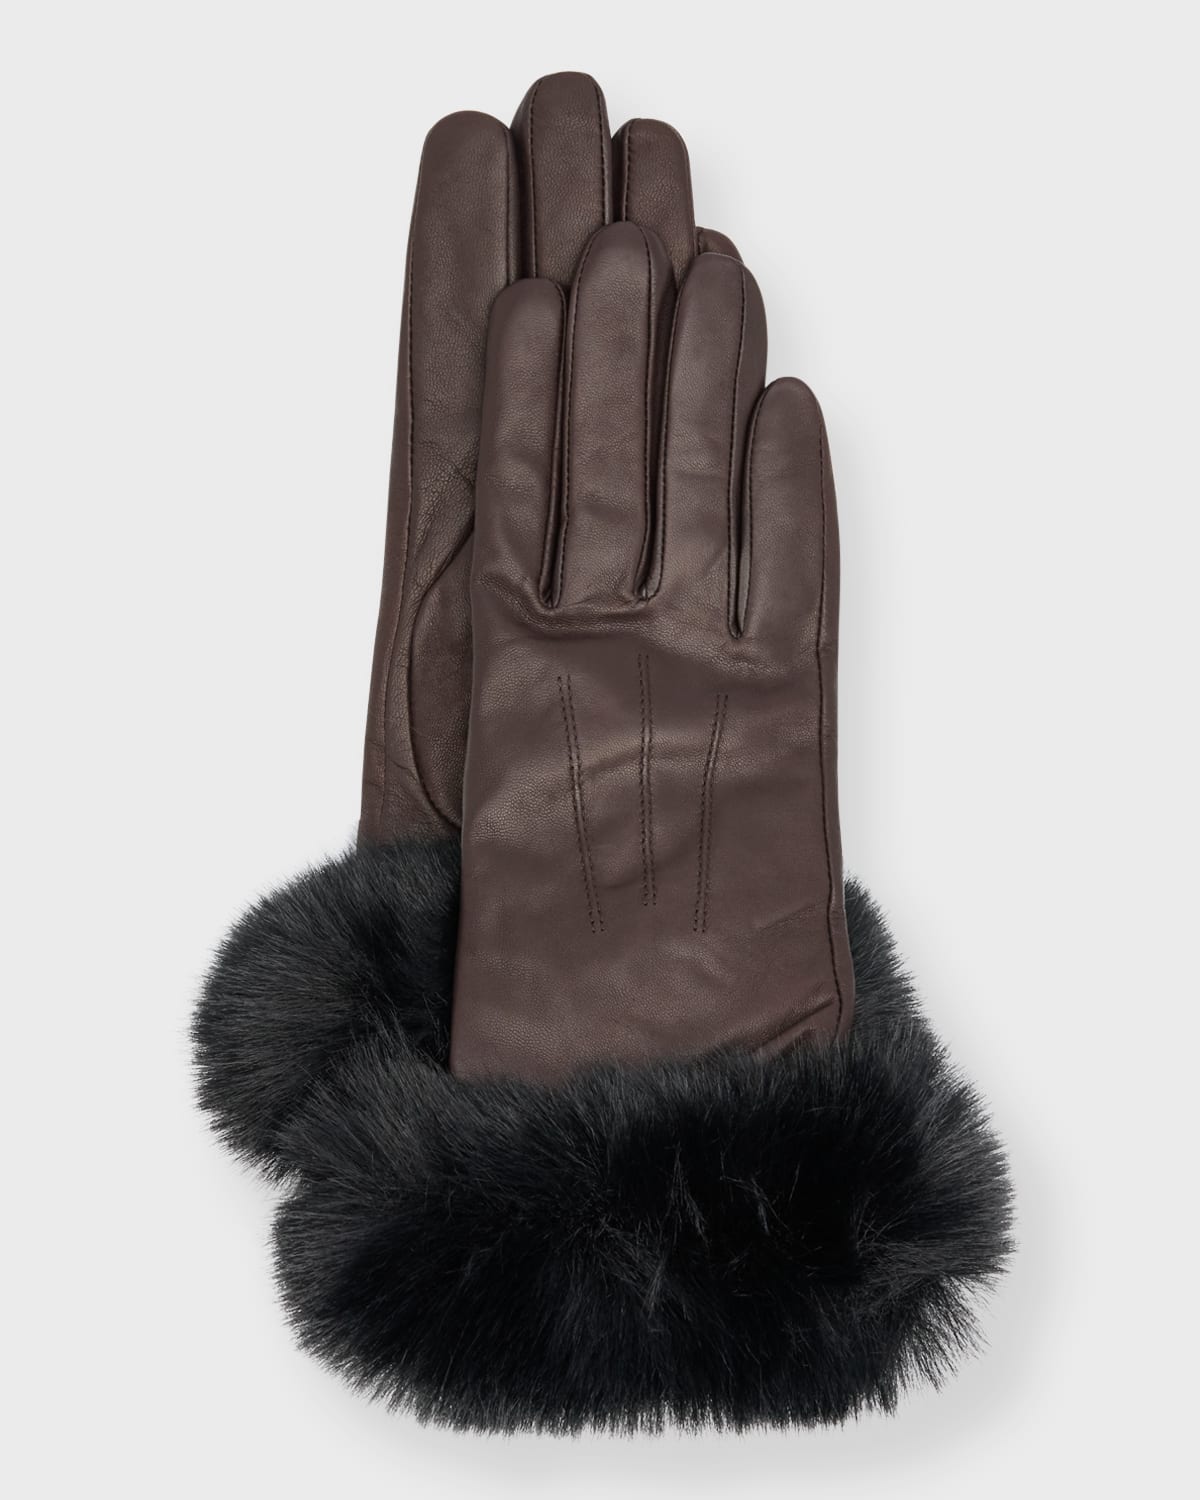 Sofia Cashmere Leather & Cashmere Gloves With Faux Fur Cuffs In Chocolate